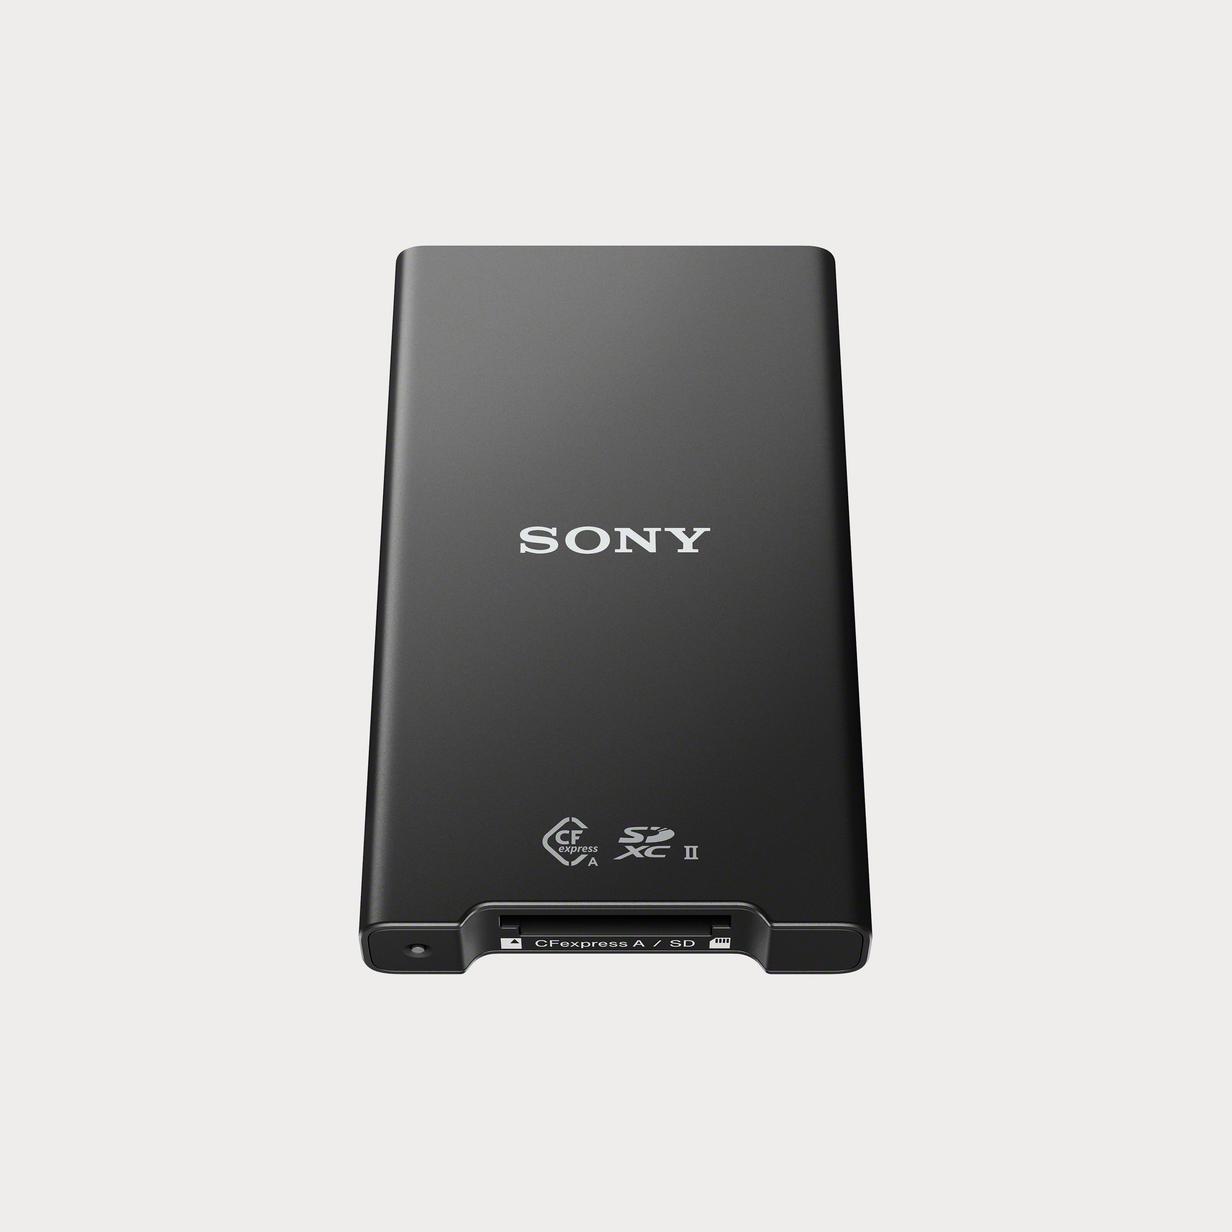 Moment sony MRWG2 C Fexpress Type A SD card reader 01